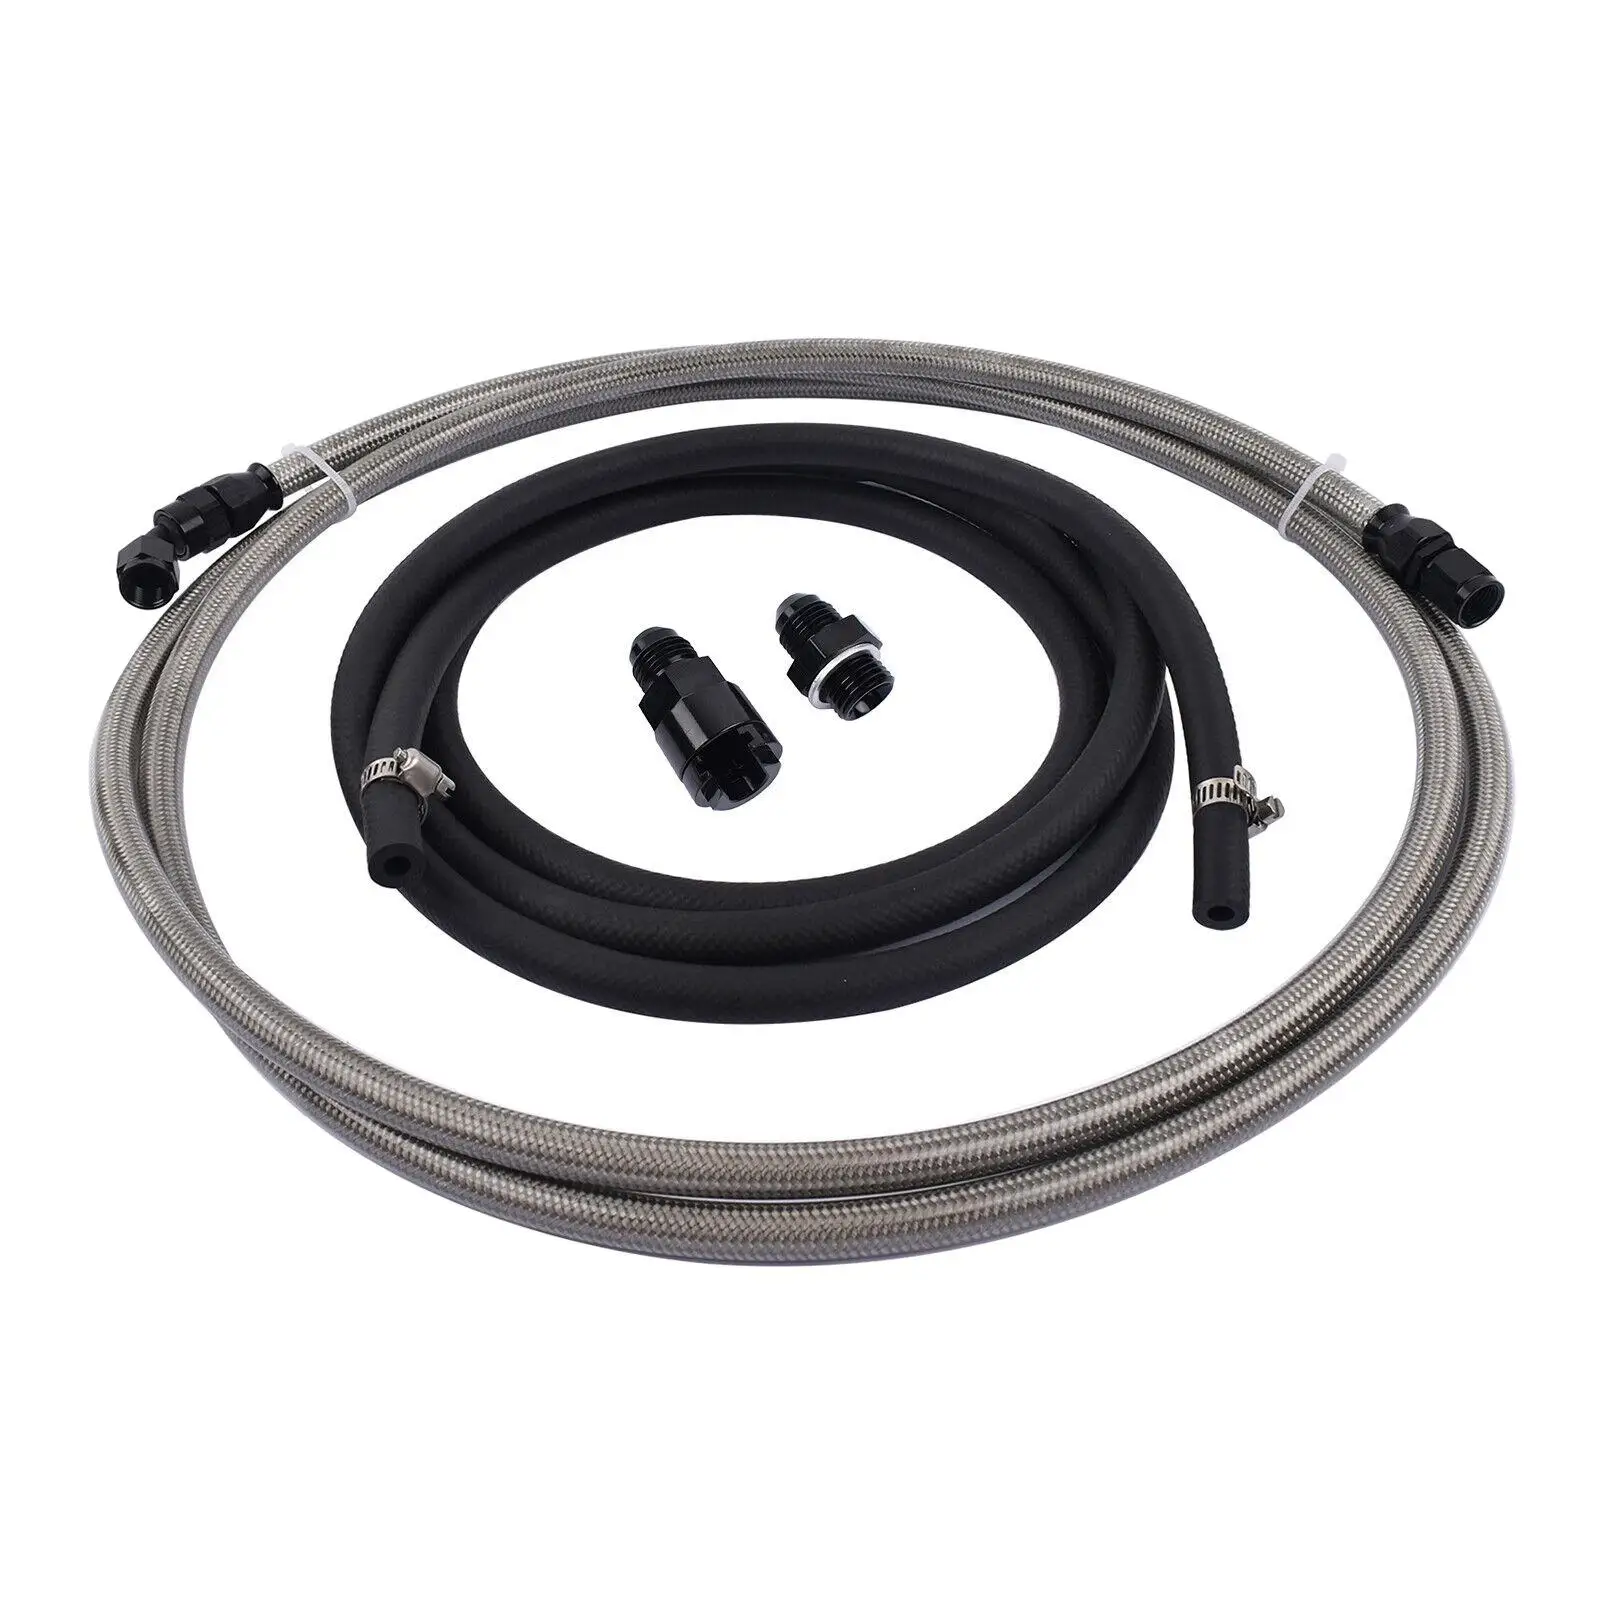 

Car Stainless Steel Fuel feed Line & Rubber Return for Honda Civic High Quality